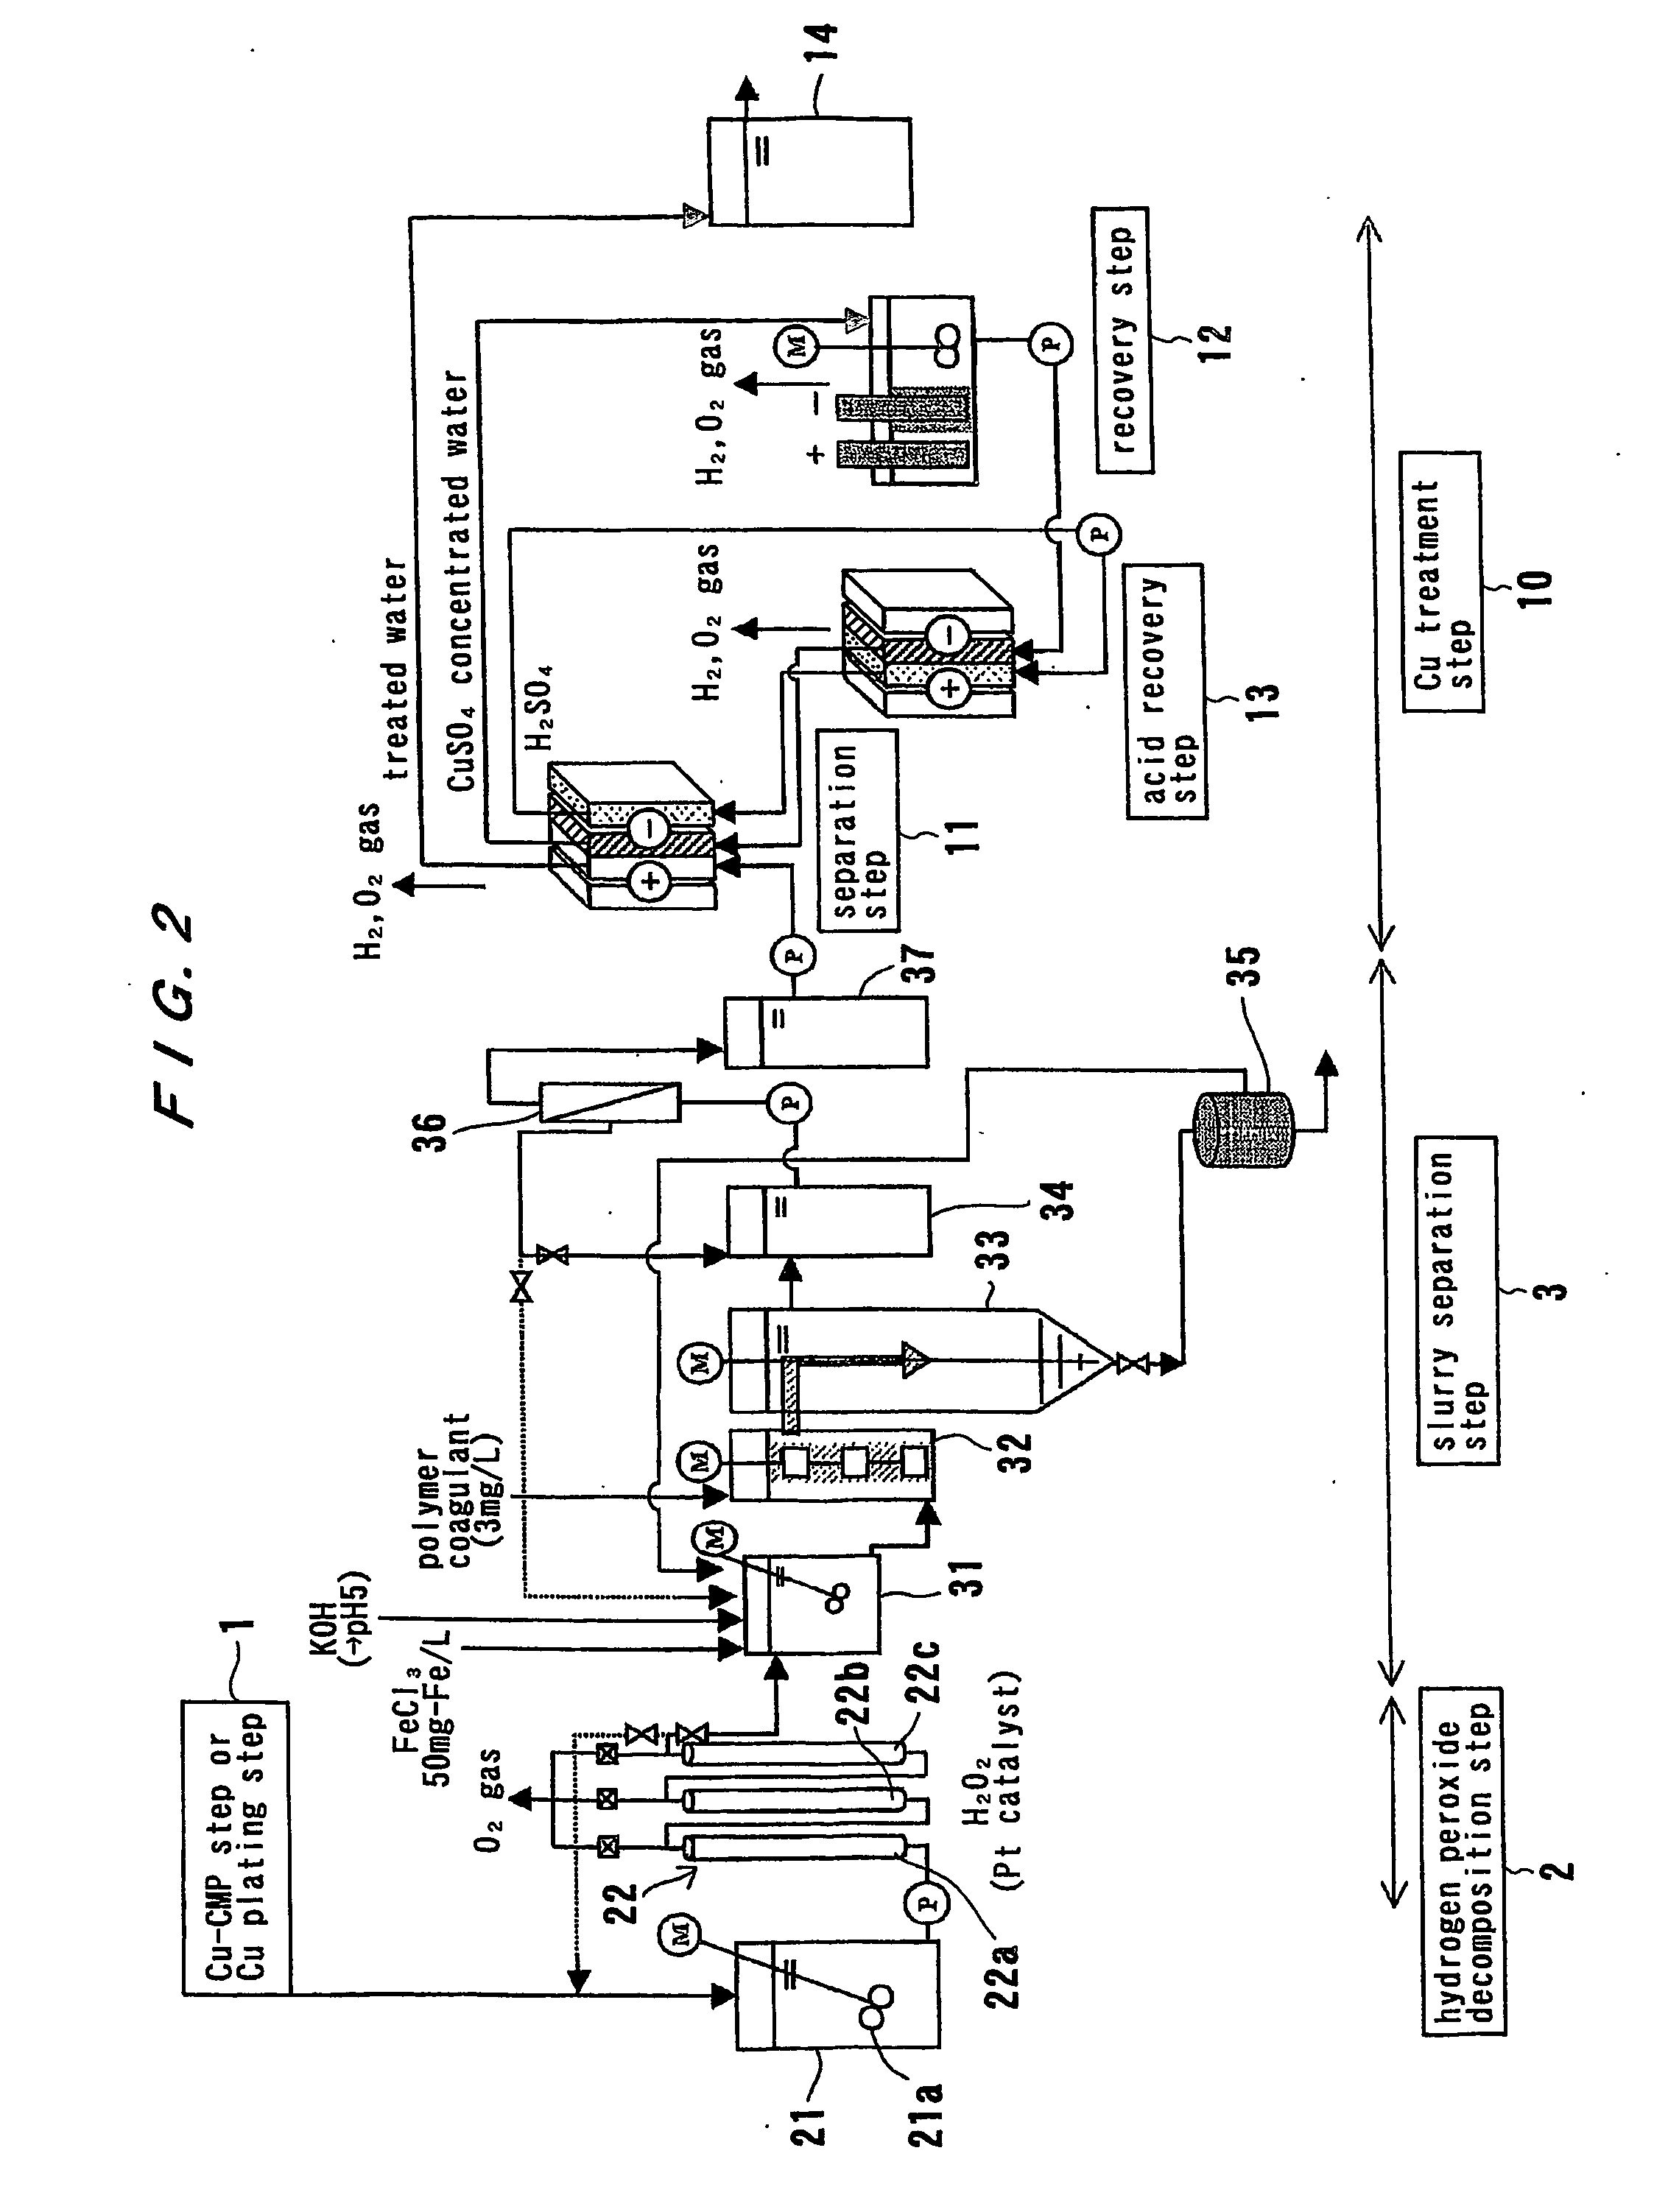 Method and apparatus for treating waste water